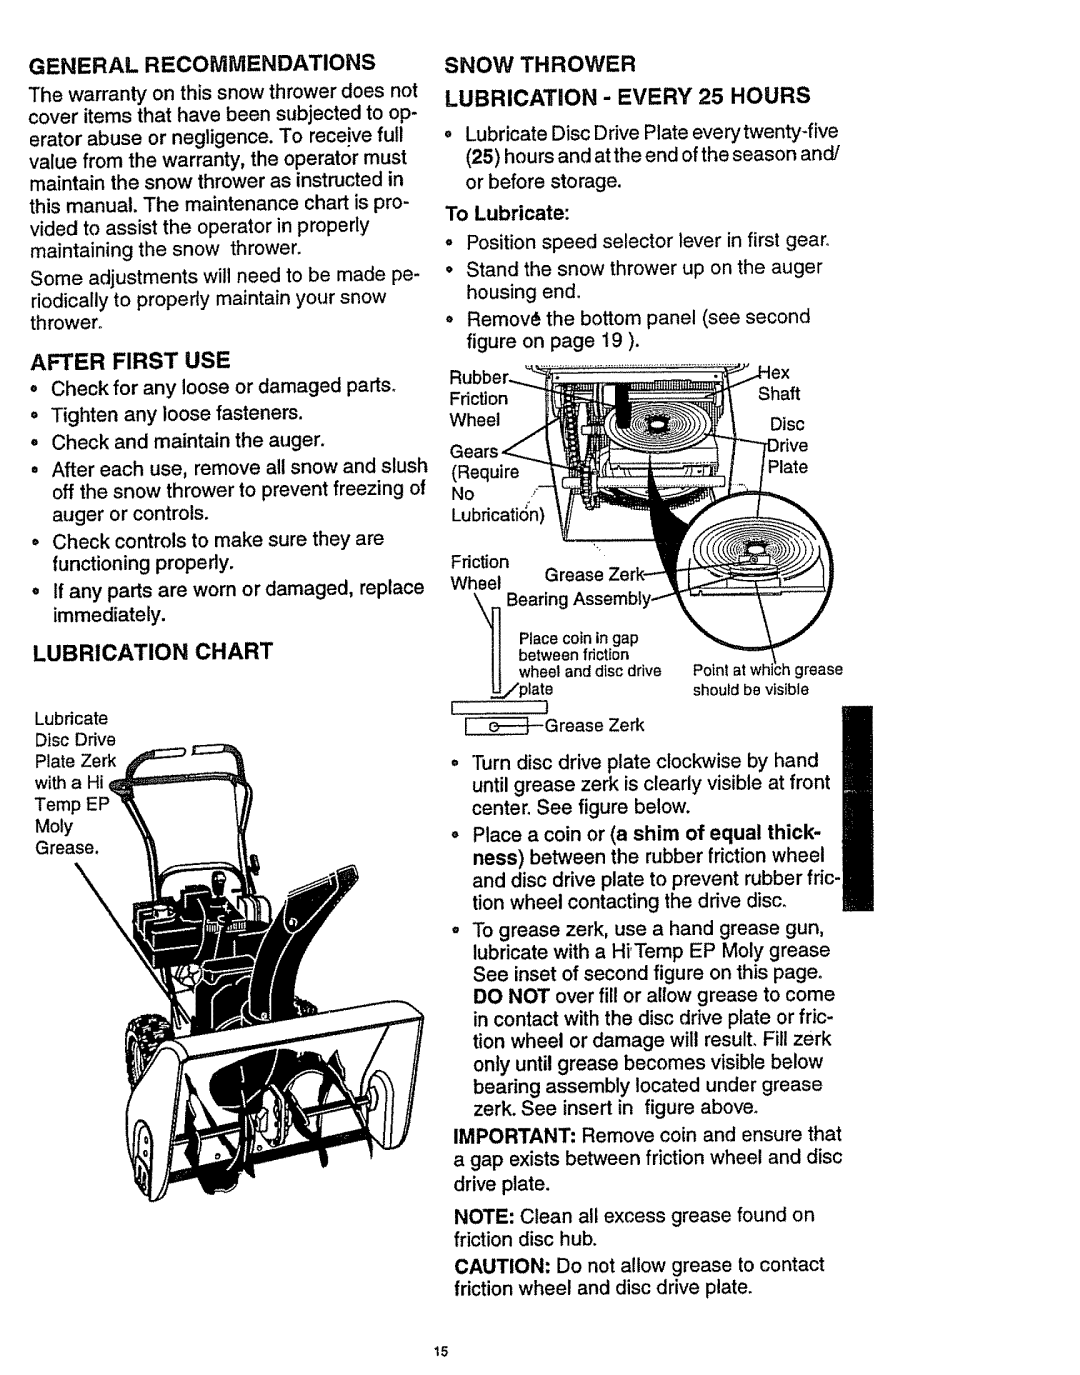 Craftsman 536.886141 Lubrication Chart, Snow Thrower Lubrication Every 25 Hours, General Recommendations, After First USE 